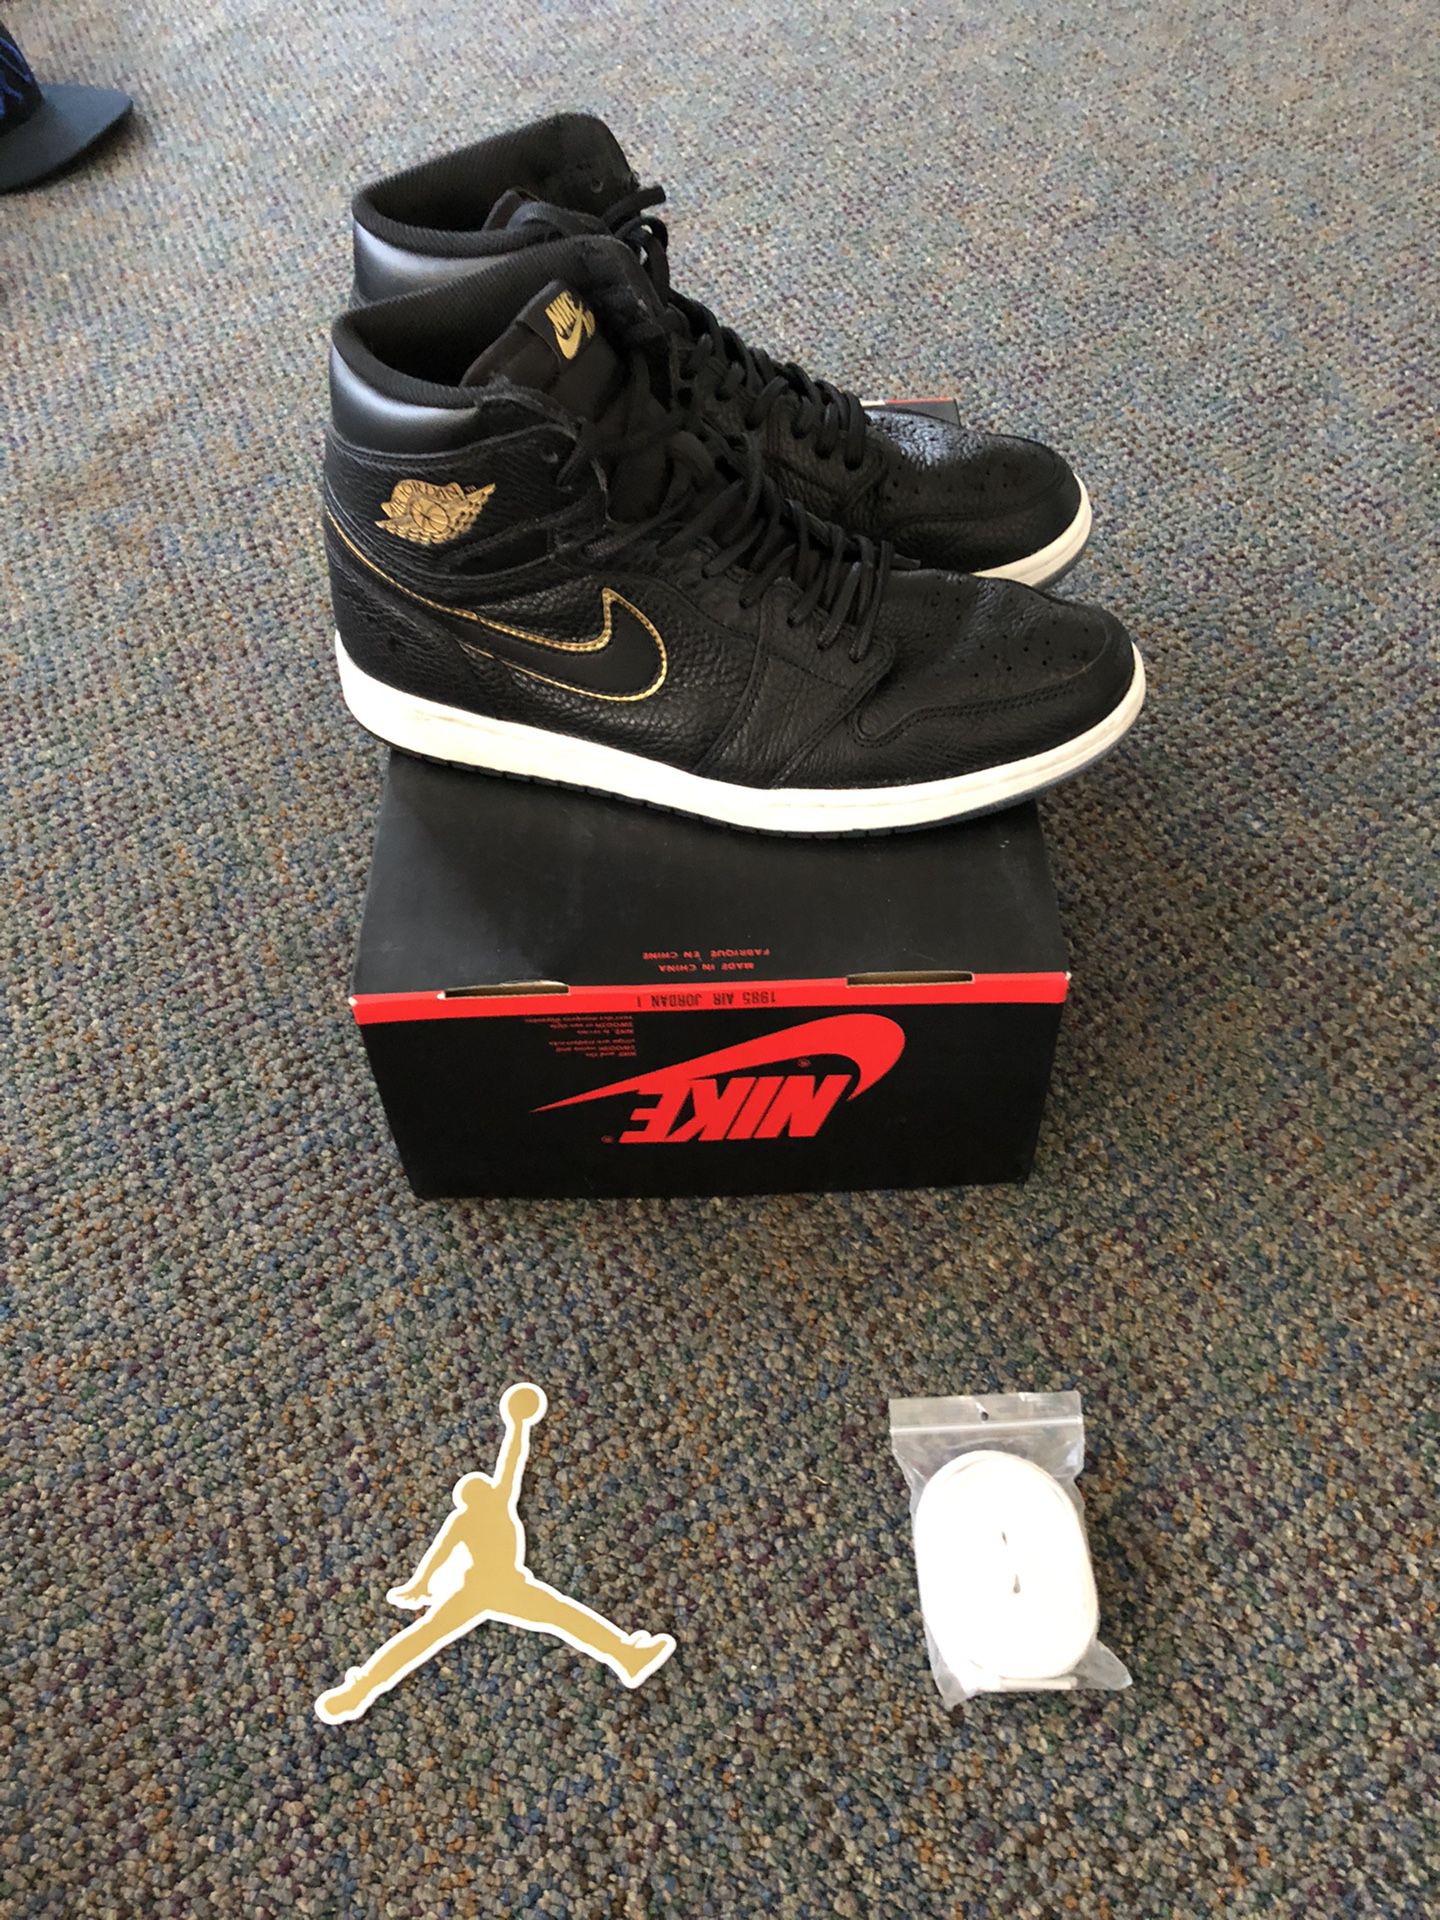 Air Jordan 1 I Retro High OG Size 10 Mens X great condition with box extra laces and Jordan sticker see photos